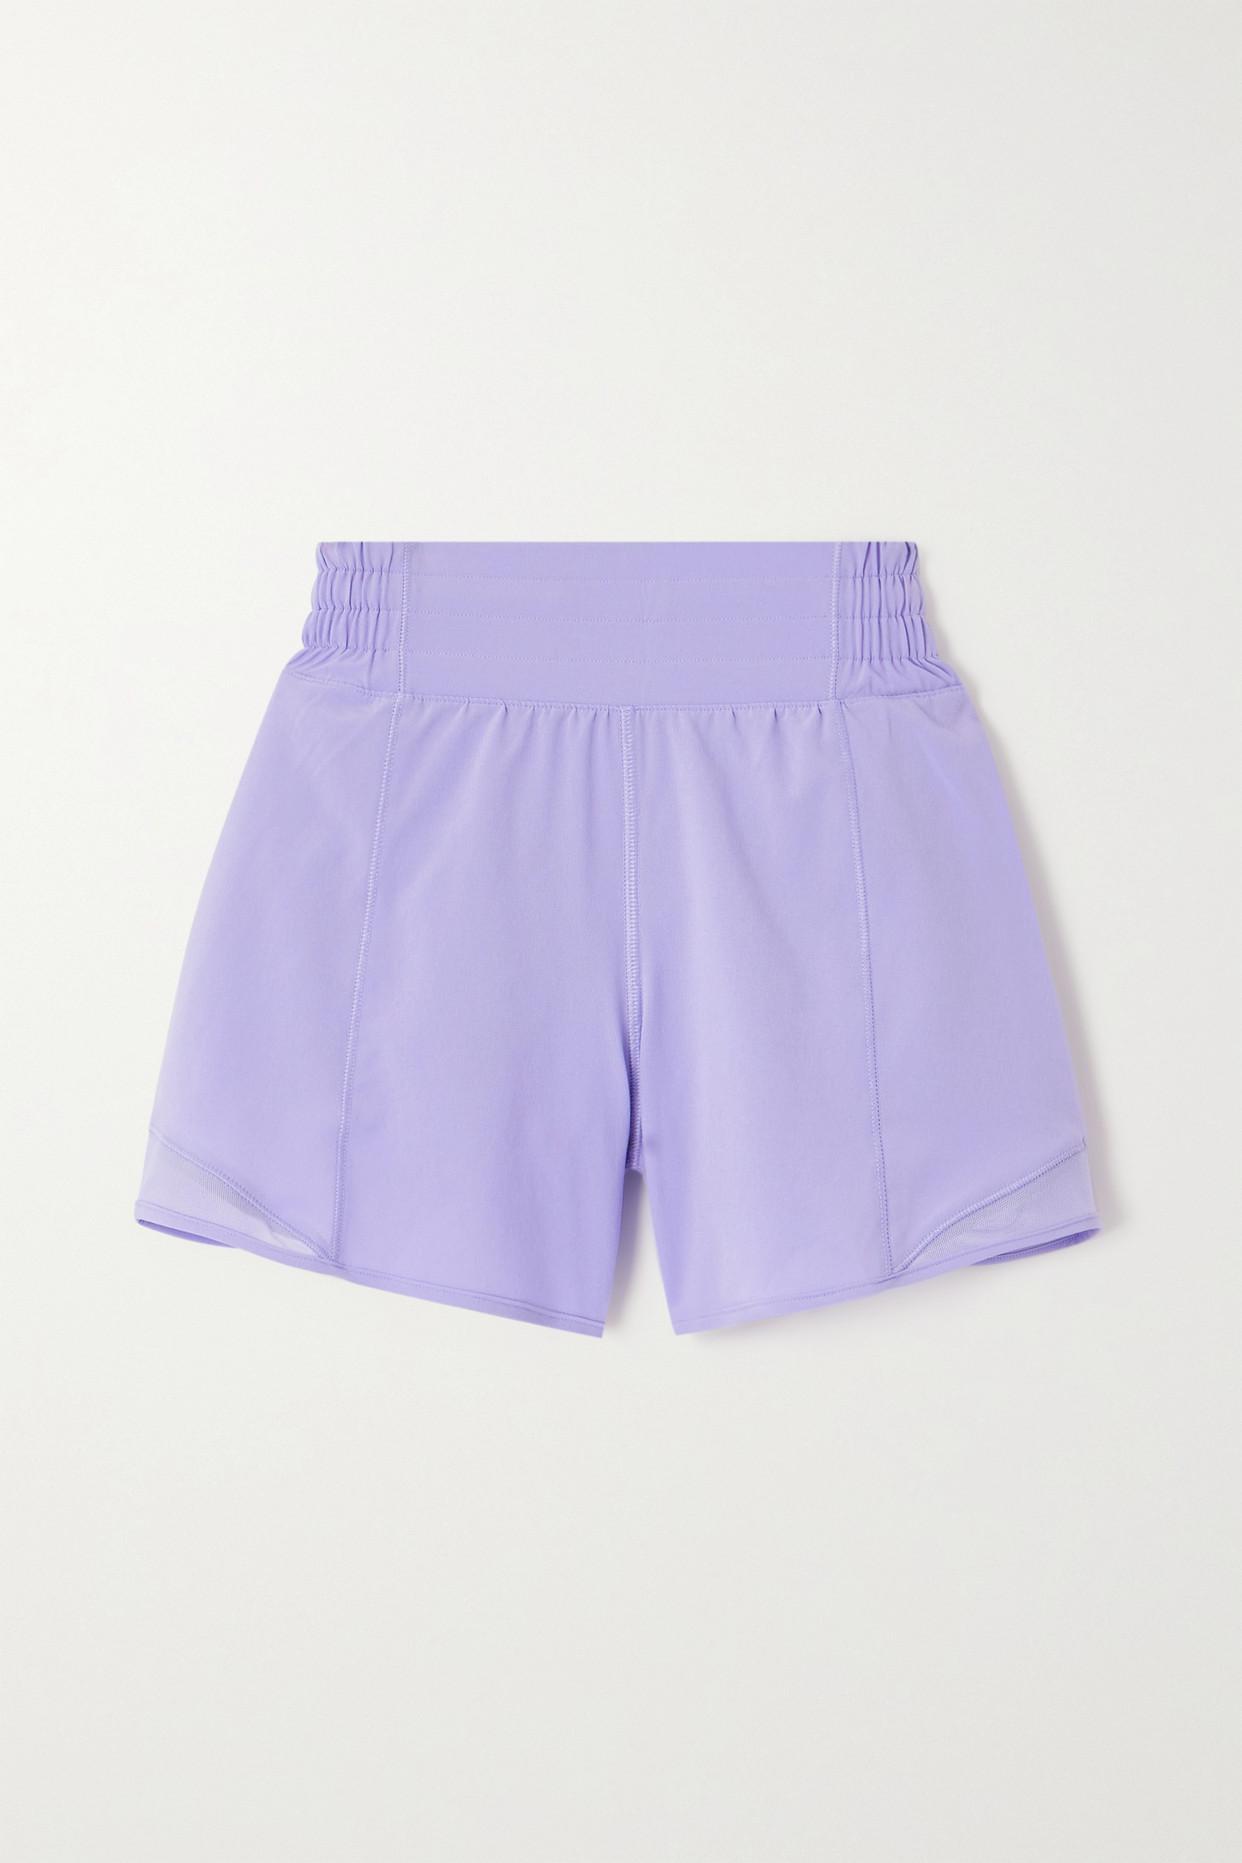 Lululemon Hotty Hot Shorts 4” Yellow - $59 (13% Off Retail) - From